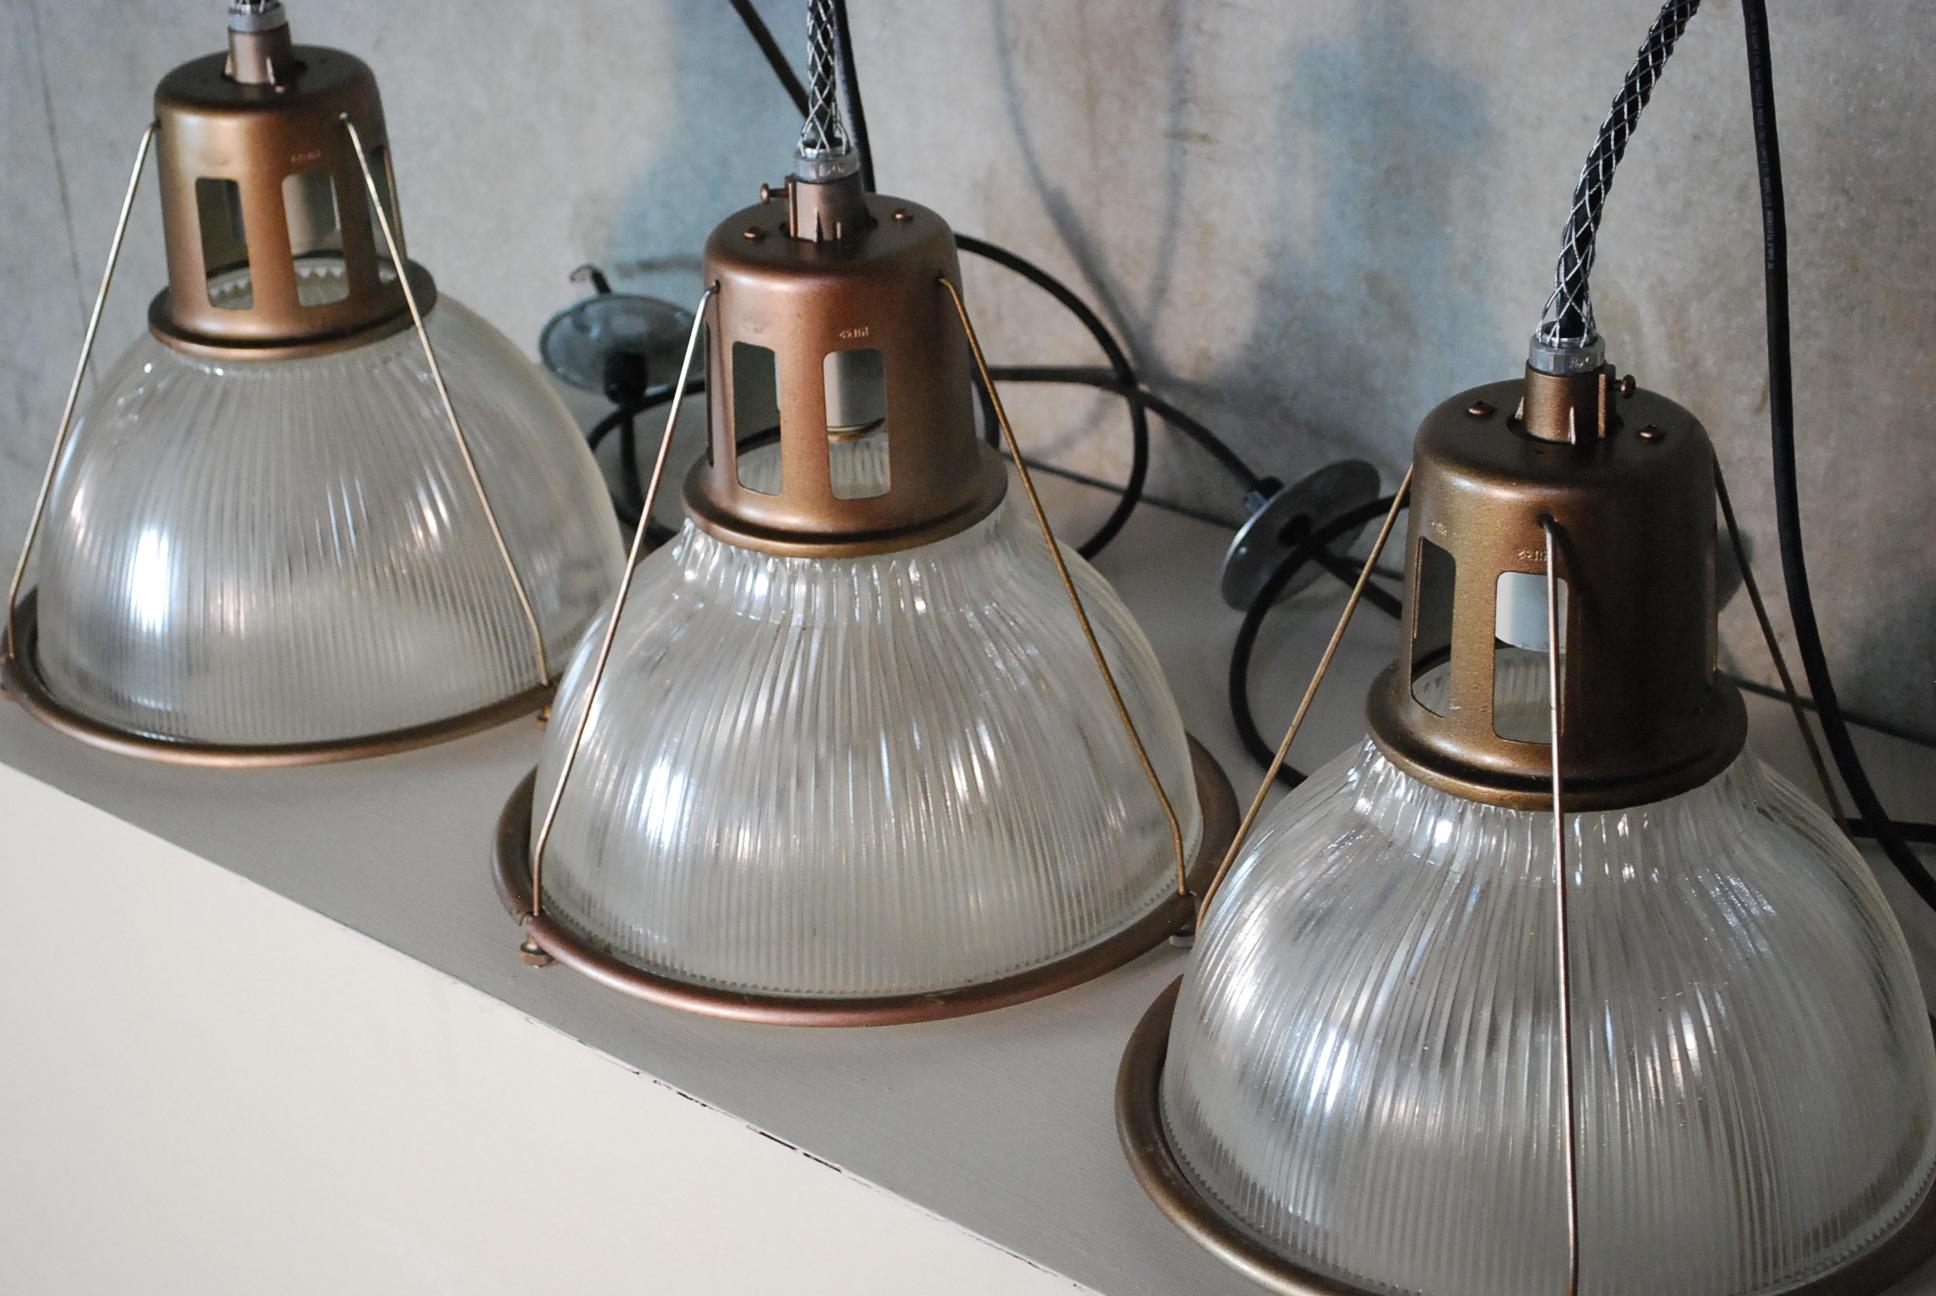 Set of three at present .. we have applied a hand rub bronze finish on original fixtures . Wirong complete csa complete and they are ready to hang no issue. 
Salvaged from a warehouse in Montreal.- WE HAVE 20 IN STOCK 
PRICE PER ITEM